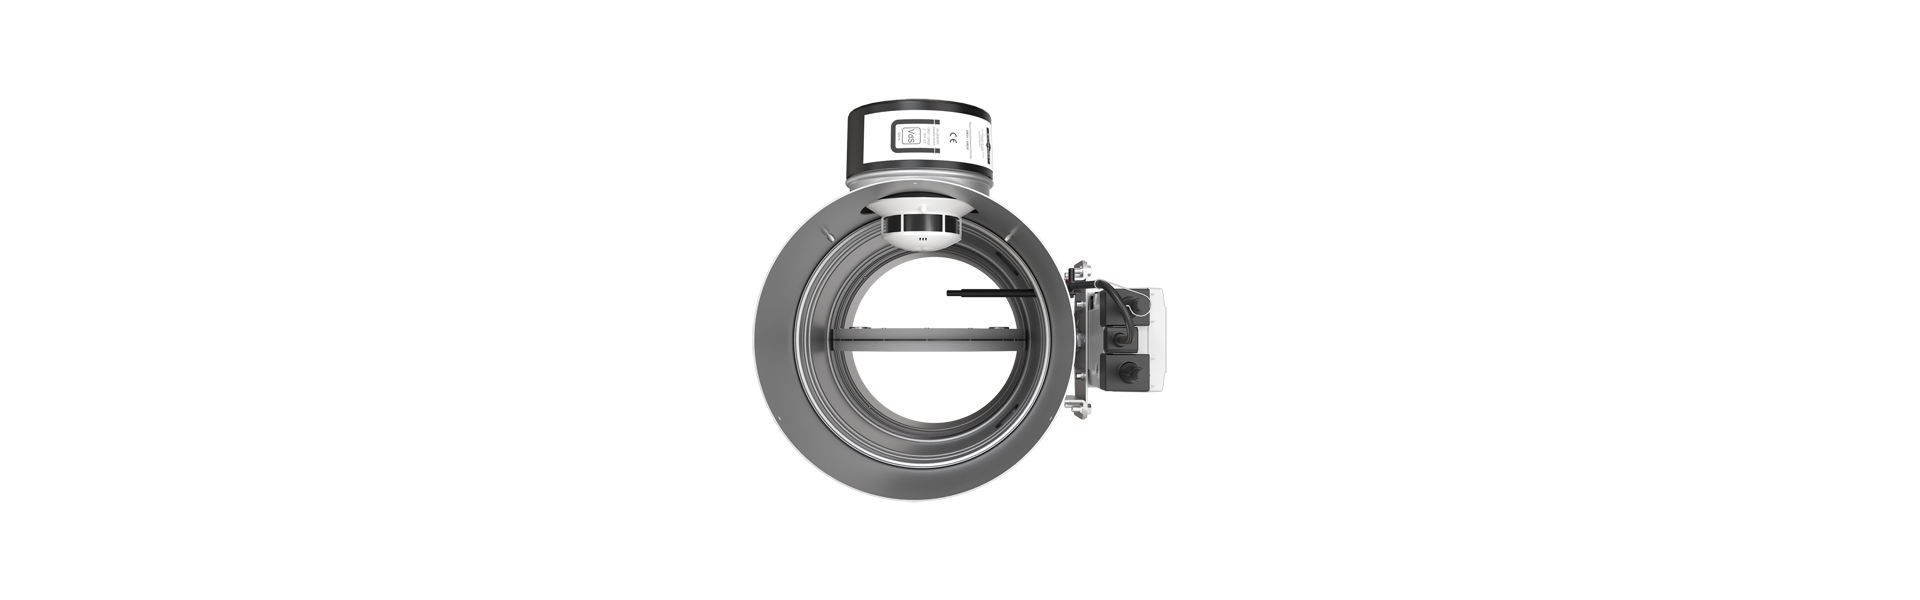 FR90 fire damper with OR32 smoke release device from the front